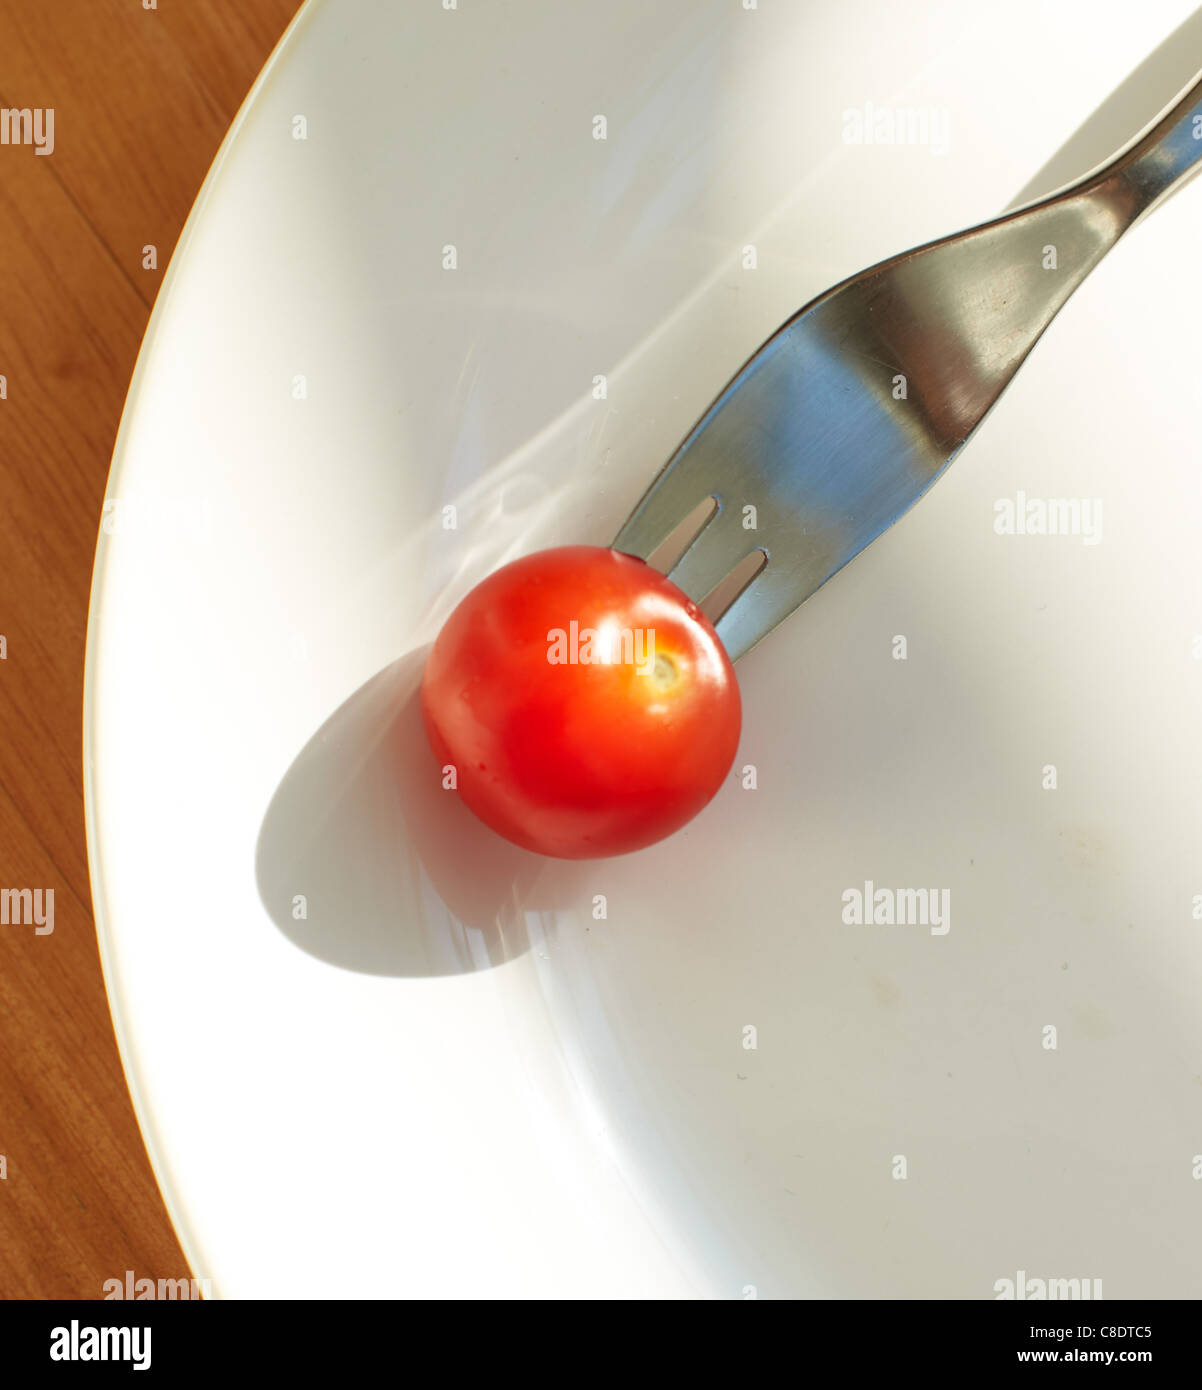 Cherry tomato on plate with fork Stock Photo